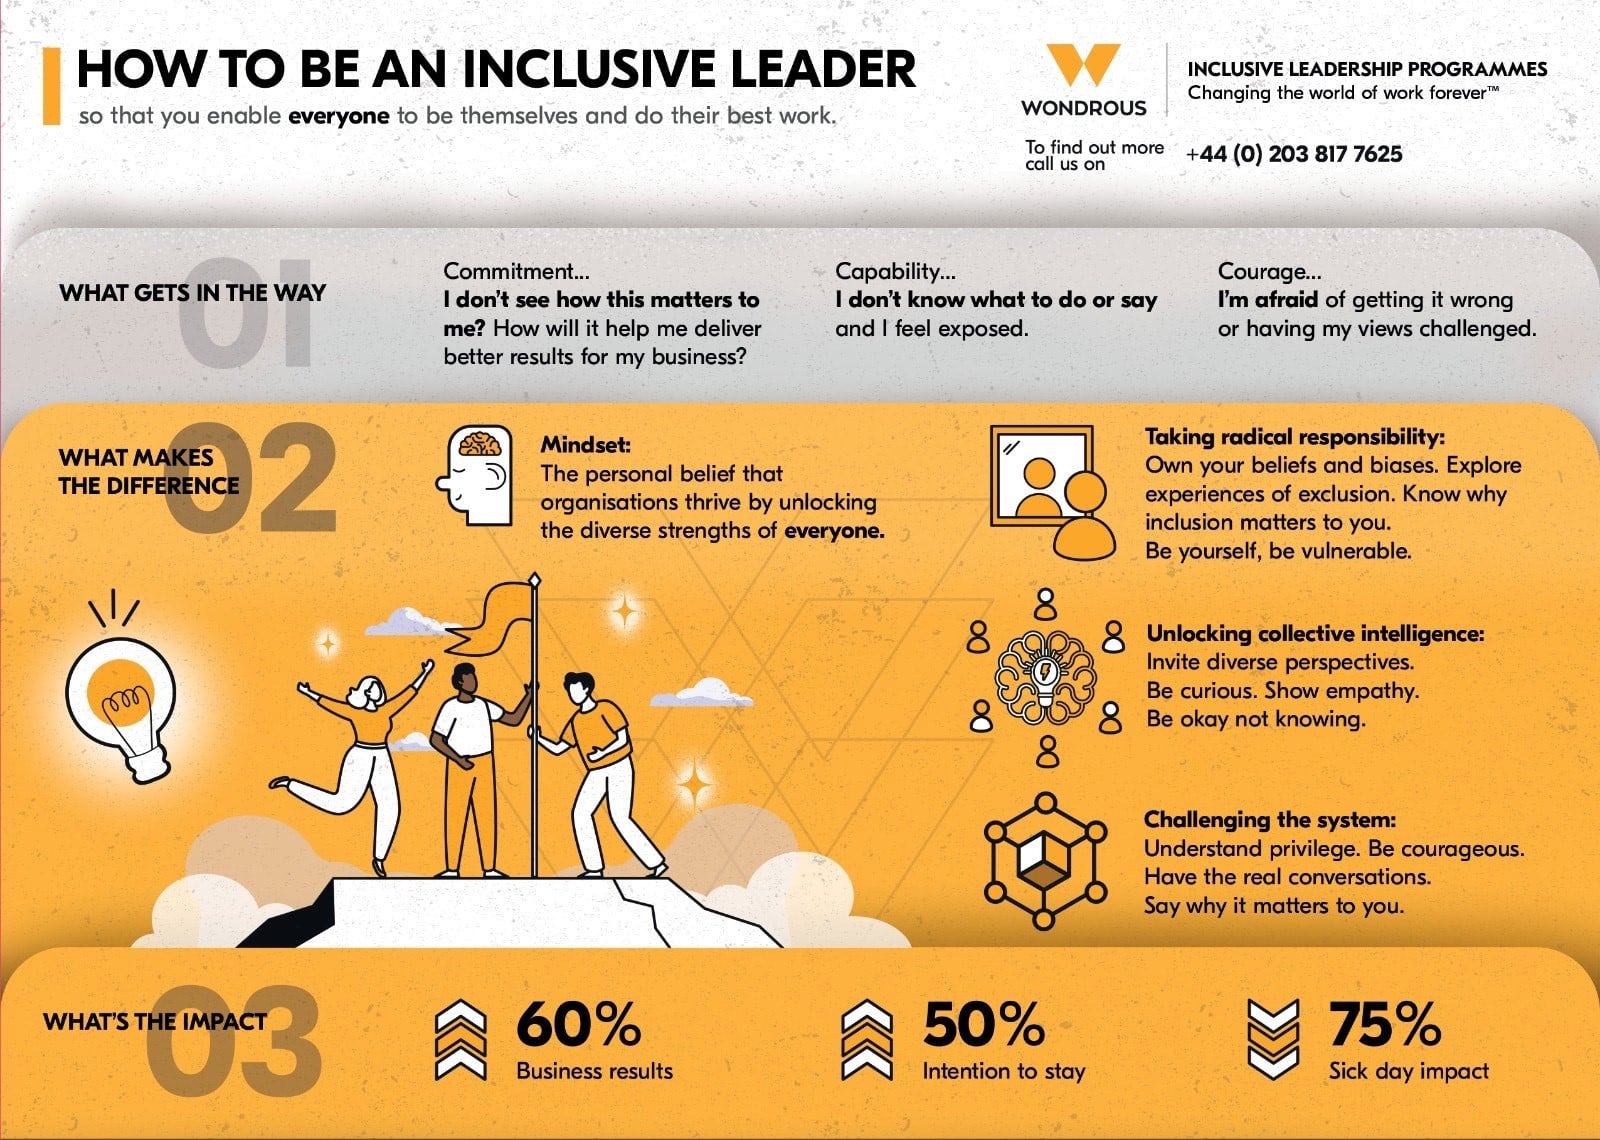 How to be an inclusive leader infographic